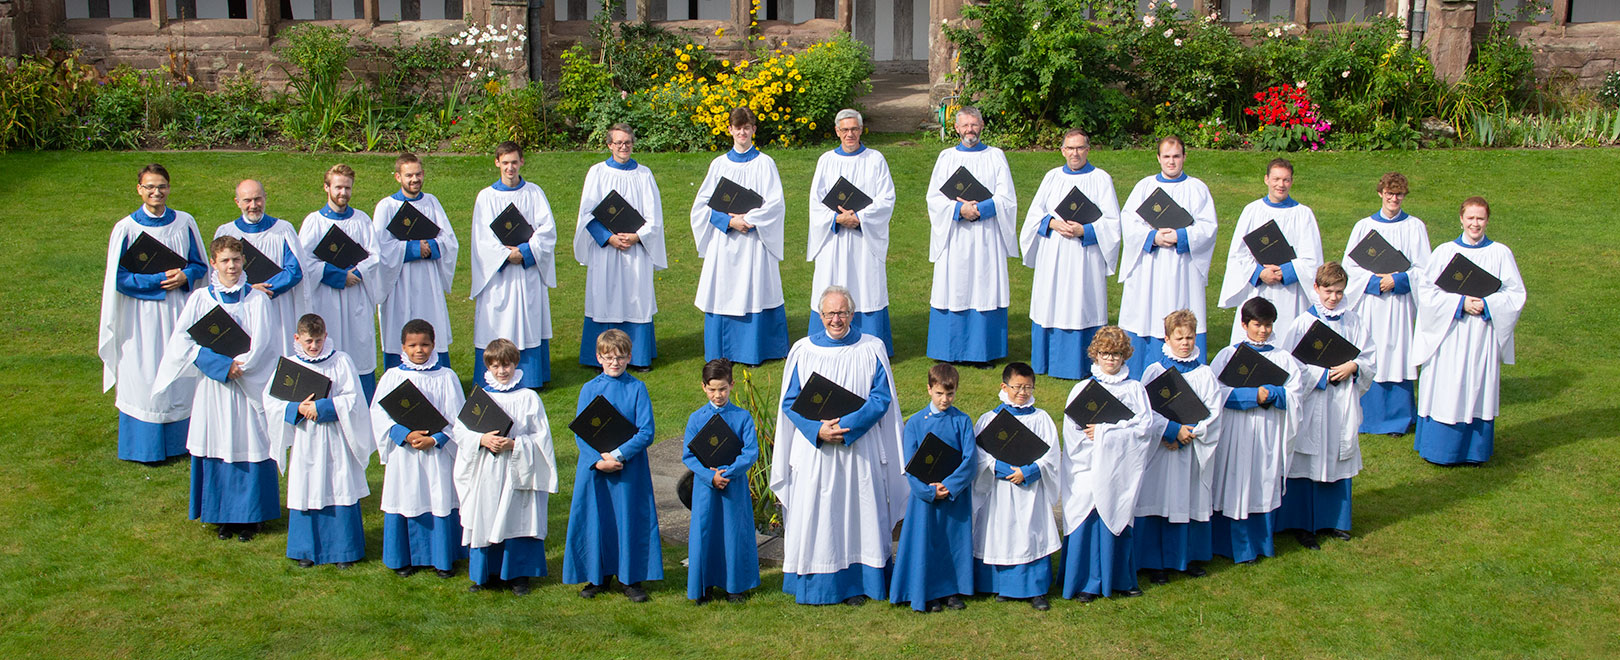 NEWS | Hereford Cathedral will be welcoming girls to join the internationally-renowned Hereford Cathedral Choir